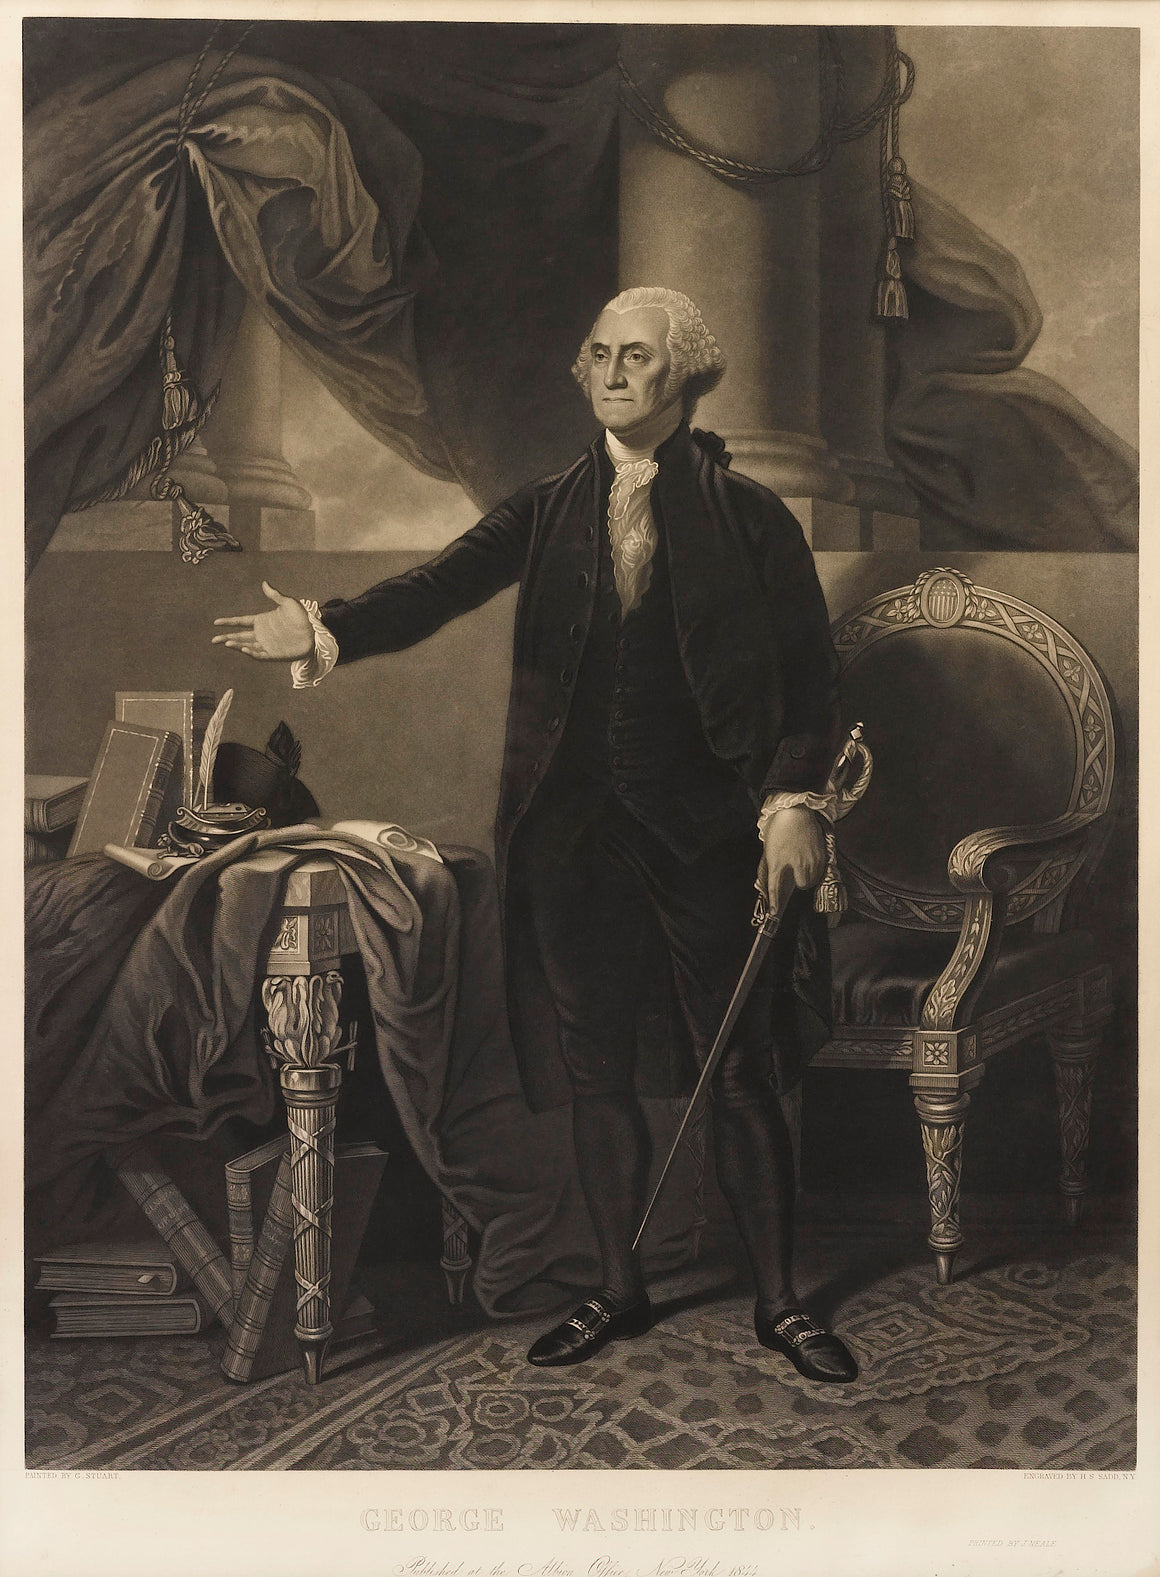 1844 George Washington Engraving by H.S. Sadd - The Great Republic